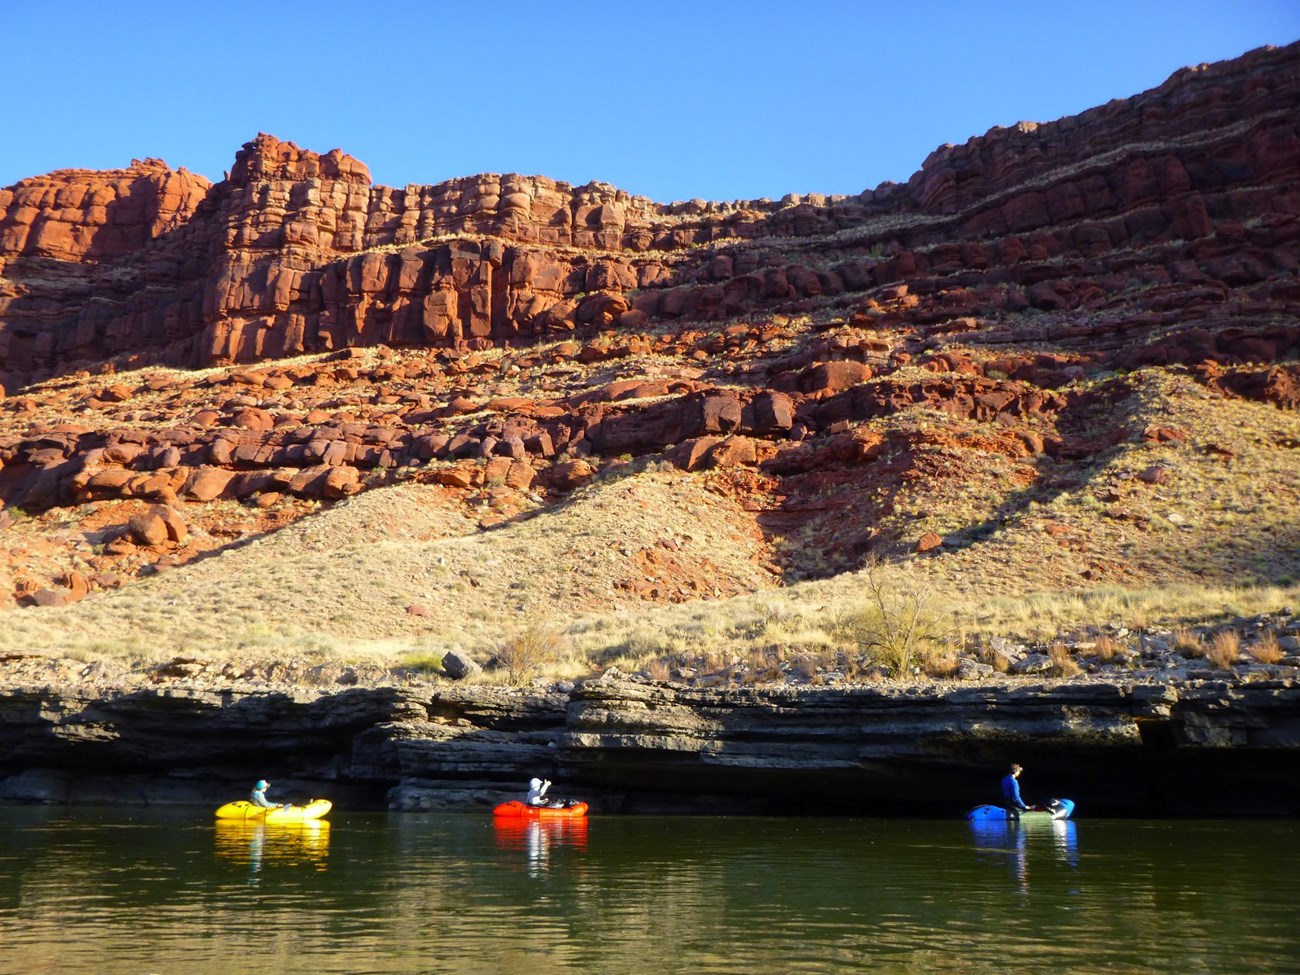 Three boats floating down a river between canyons